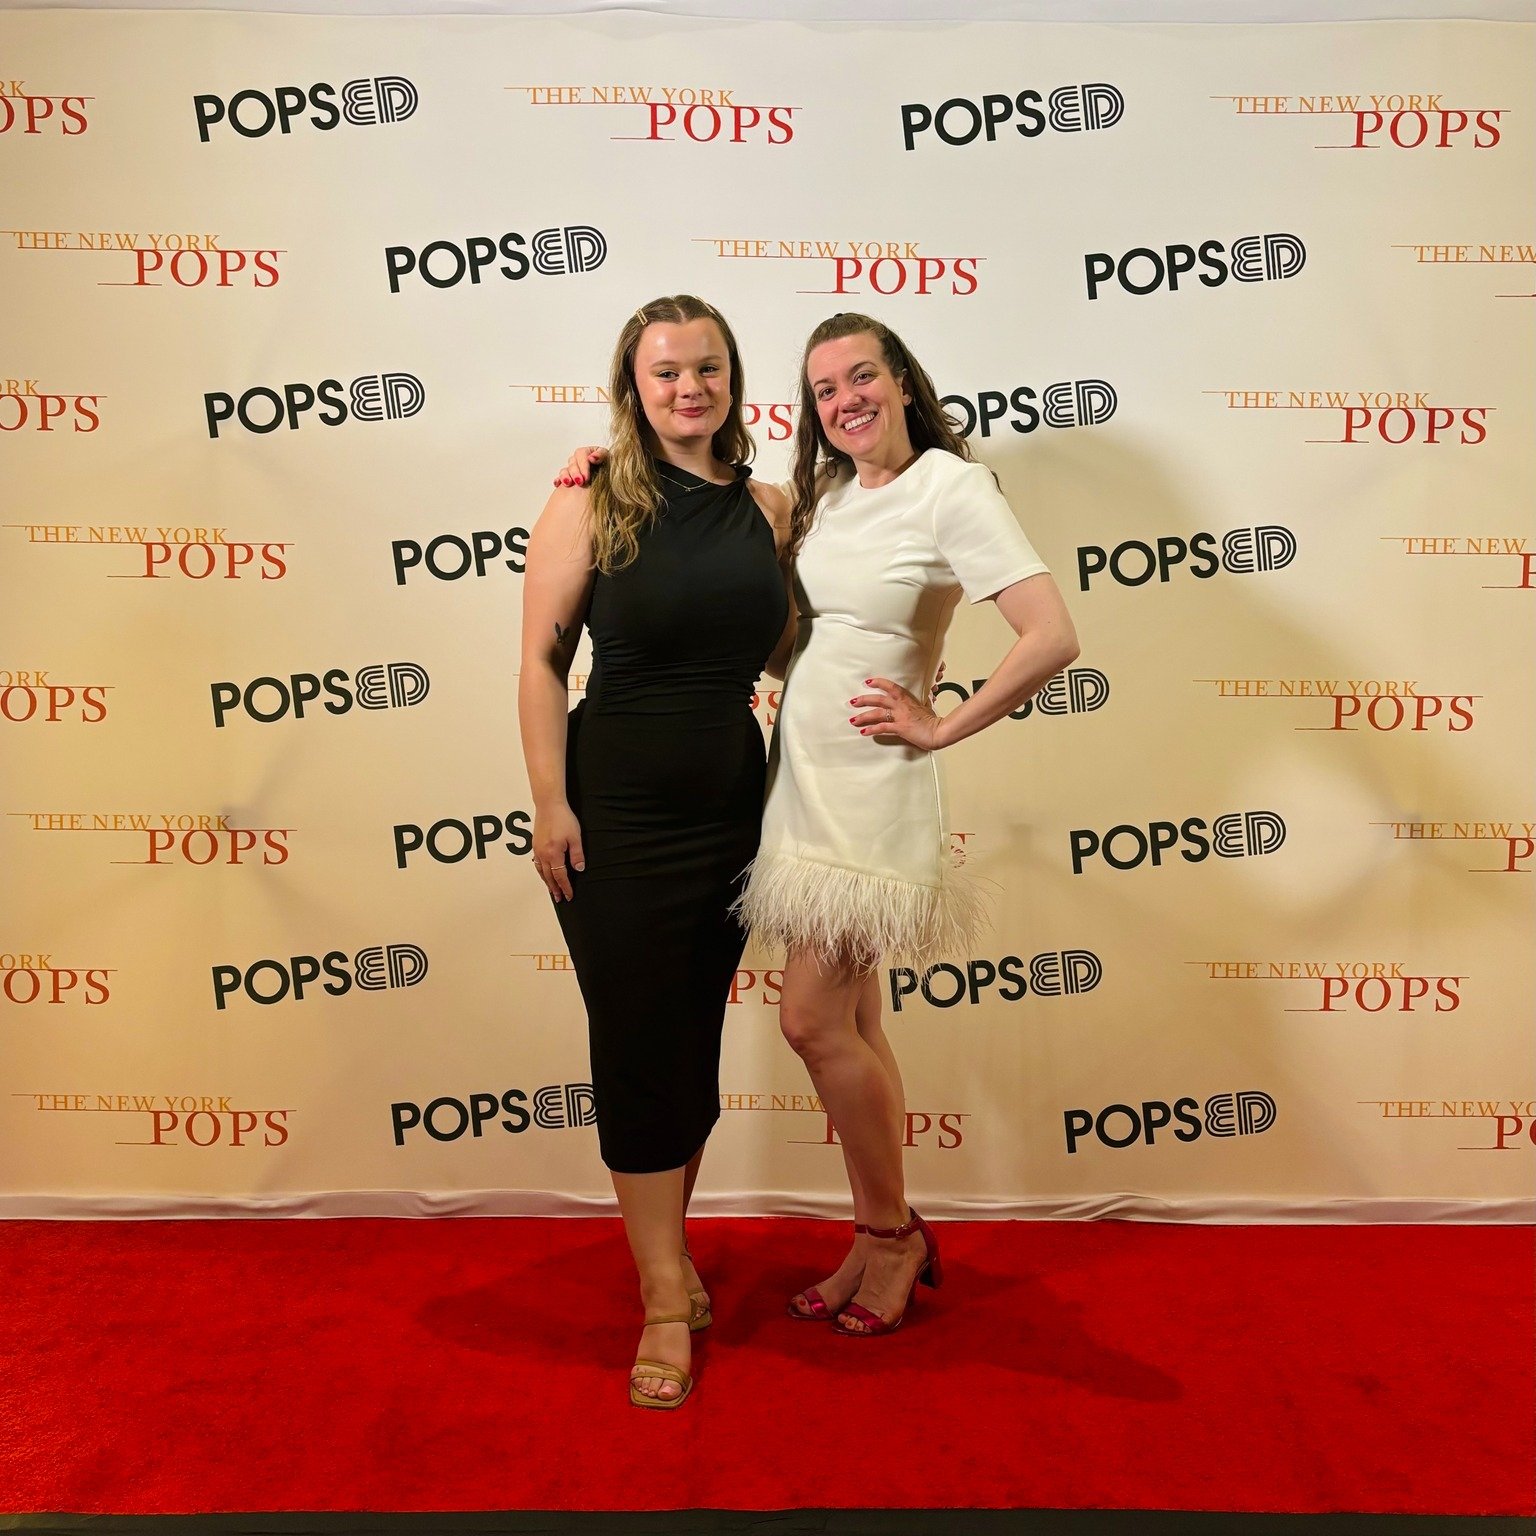 Last night, Katlyn and Amanda attended The New York Pops (@thenewyorkpops) 41st Birthday Gala! They had the best time seeing all the amazing guest artists come to support the honoree, Clive Davis, and of course The New York Pops! 🌟